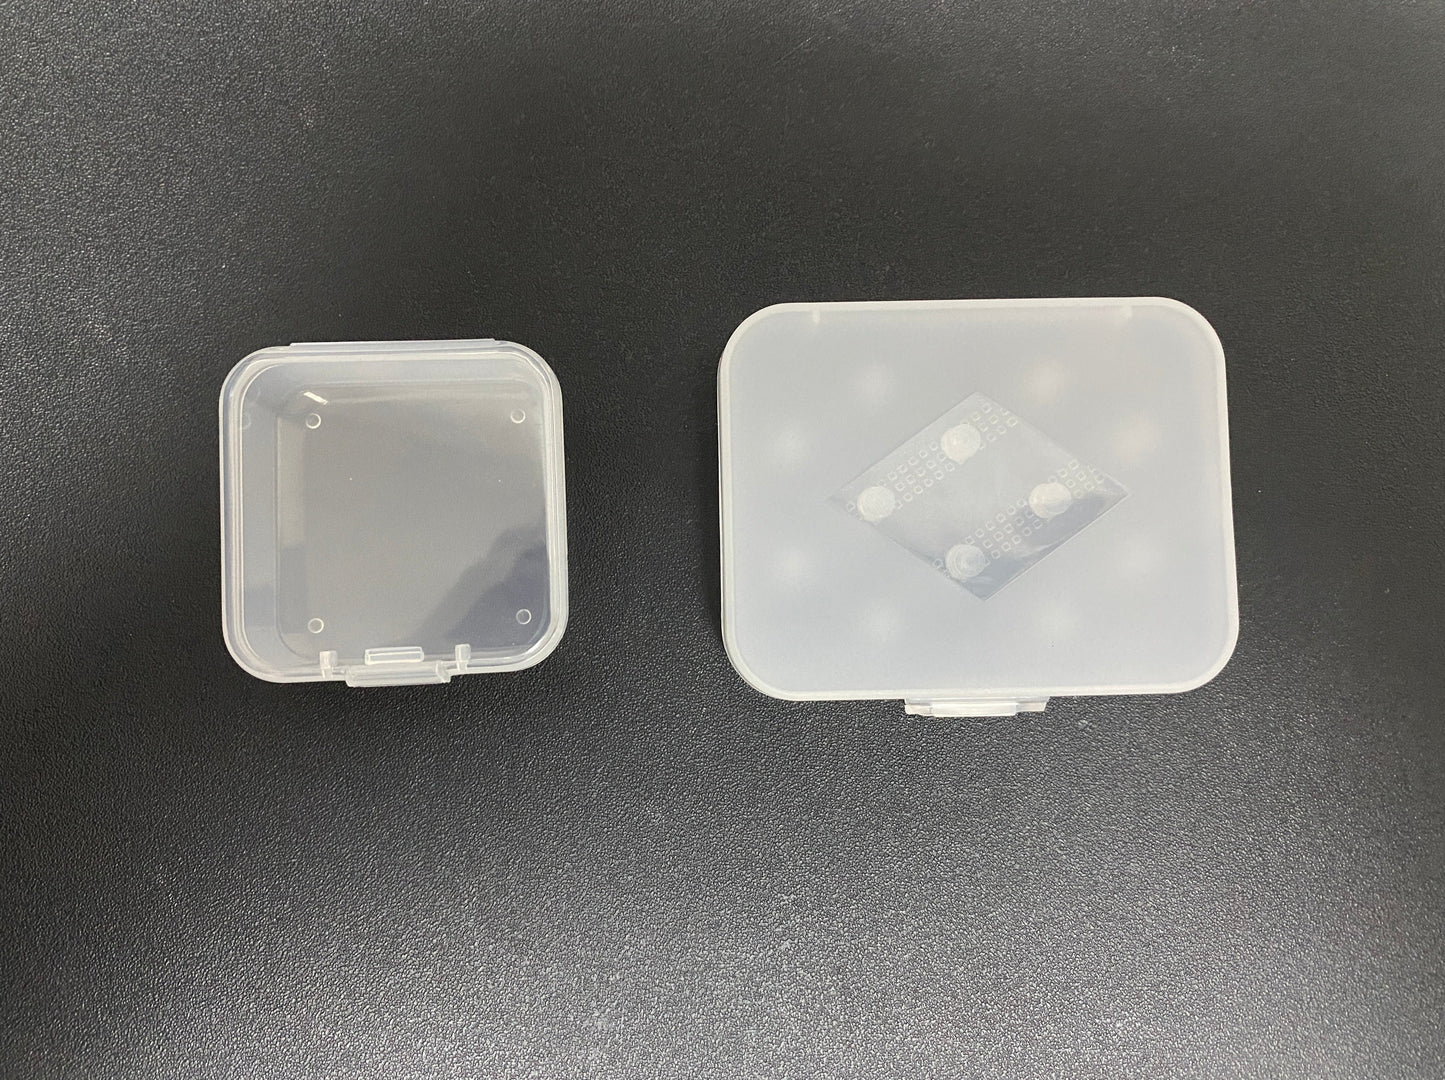 AccessoryJack Plastic Case for Eartips 1 Square 1 Rectangular Clear